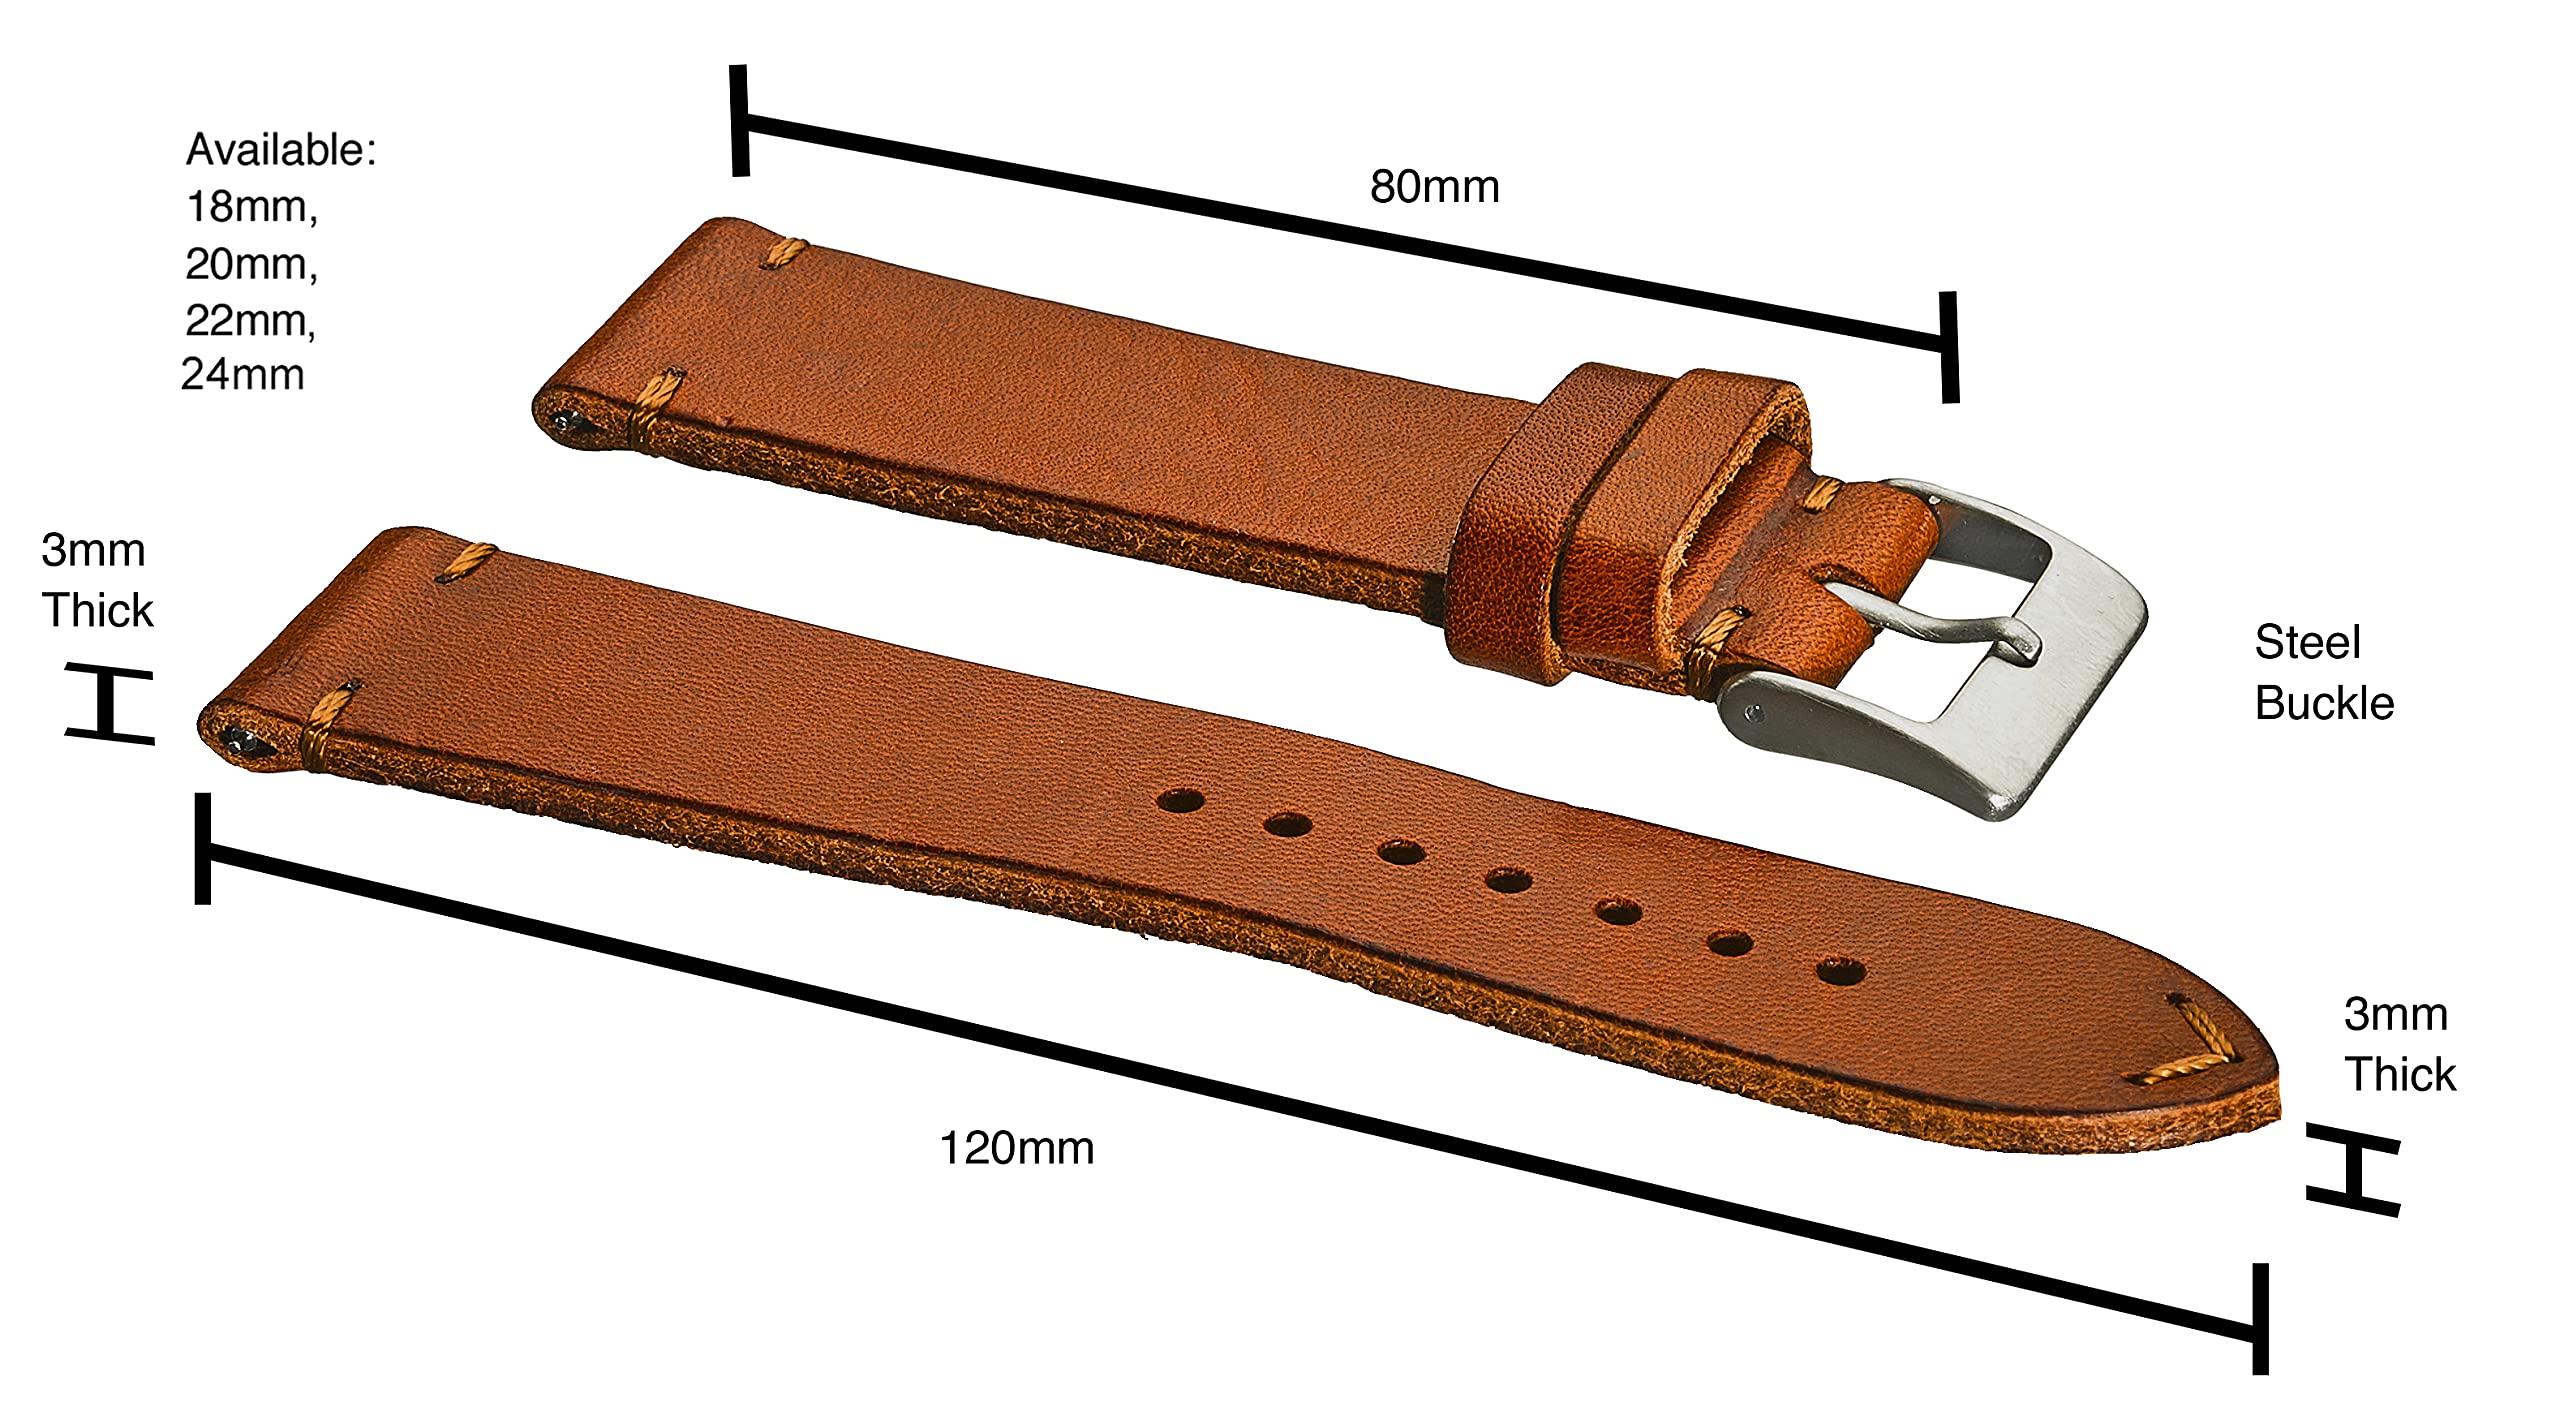 ALPINE Hand Made Genuine Vintage Leather Watch Strap with Quick Release Steel Spring Bars - Black, Brown, Grey, Blue and Tan in Sizes 18mm, 20mm, 22mm, 24mm (fits Wrist Size 6 1/4 inch to 8 inch)